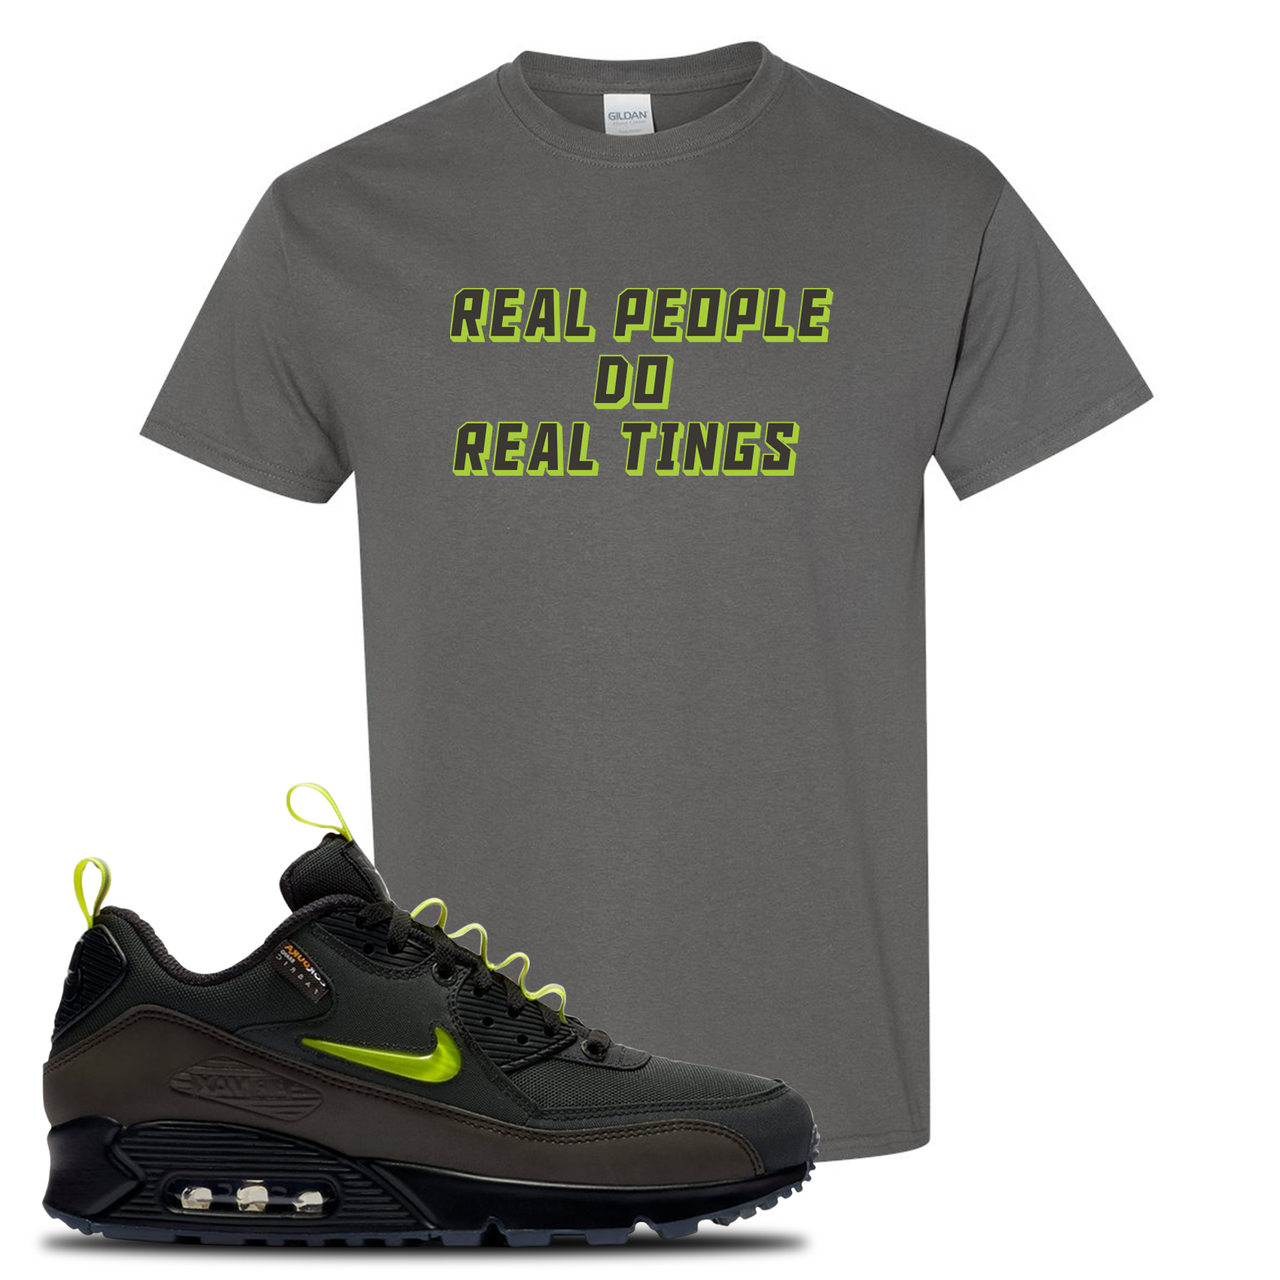 The Basement X Air Max 90 Manchester Real People Do Real Things Charcoal Gray Sneaker Hook Up T-Shirt